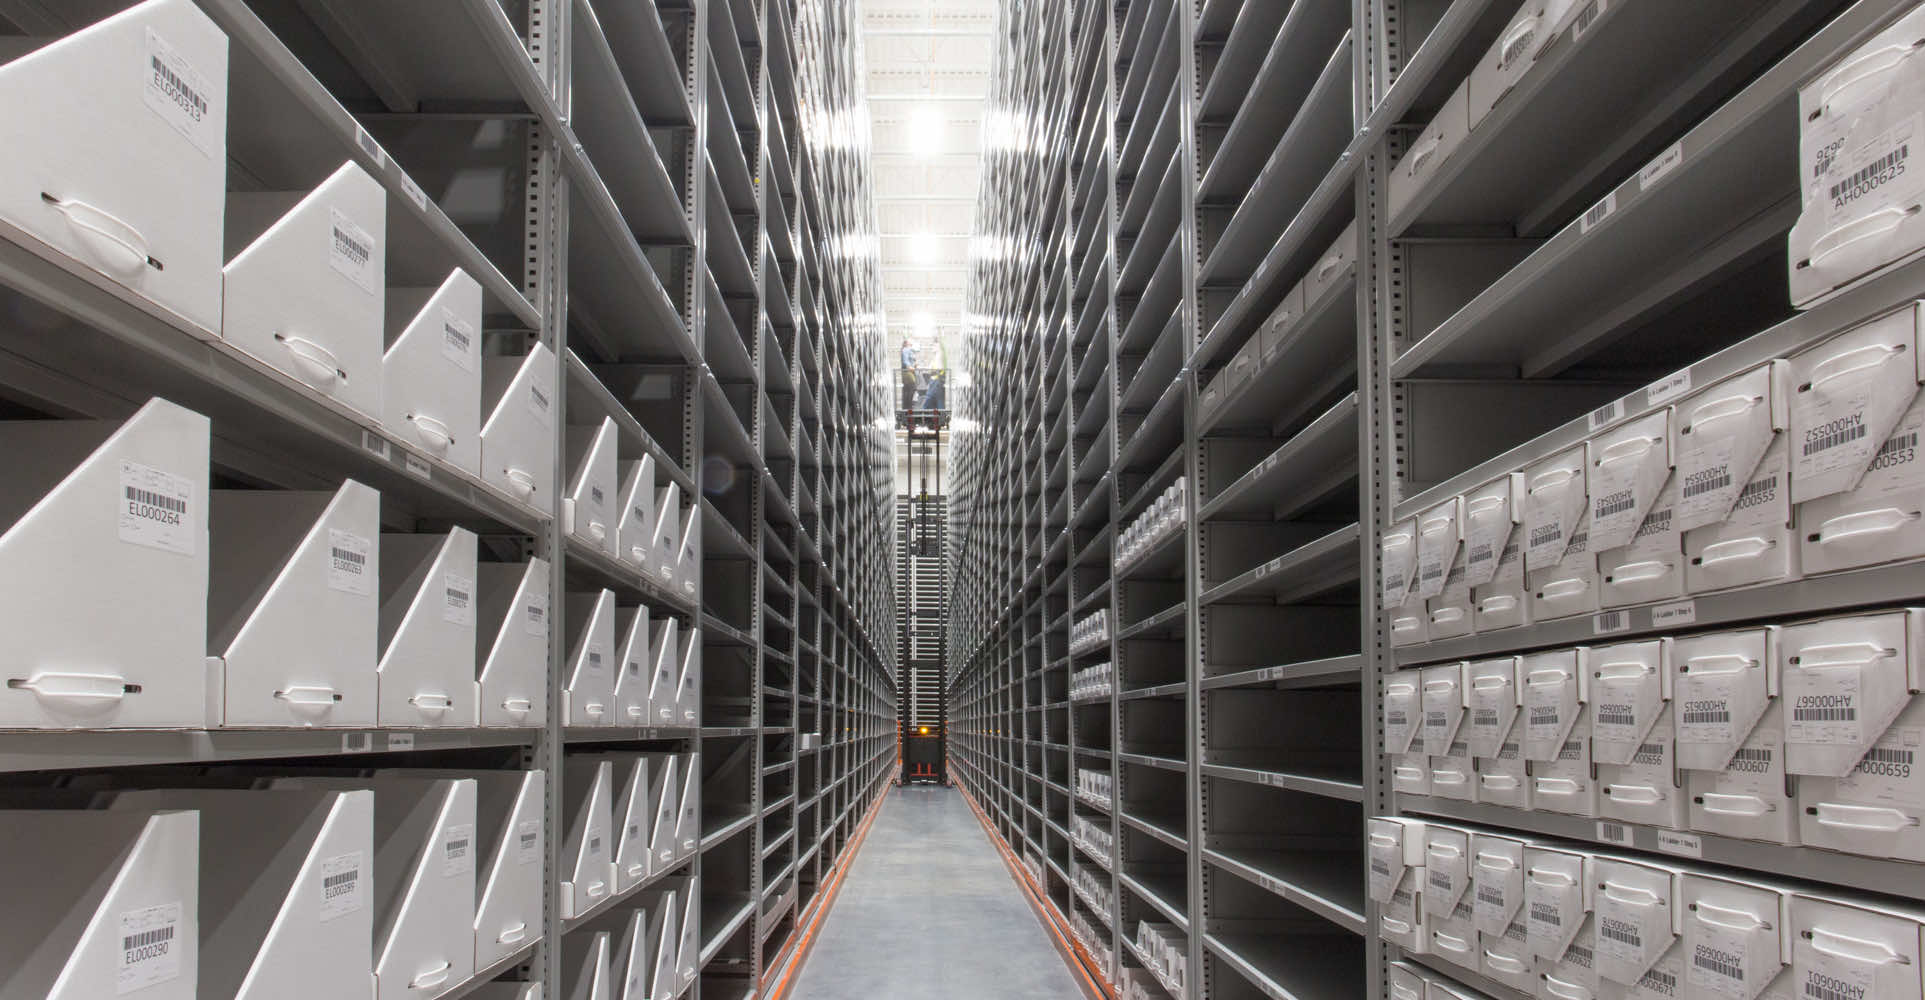 Aisle of high-bay installation holding boxes of books and files in an off-site facility